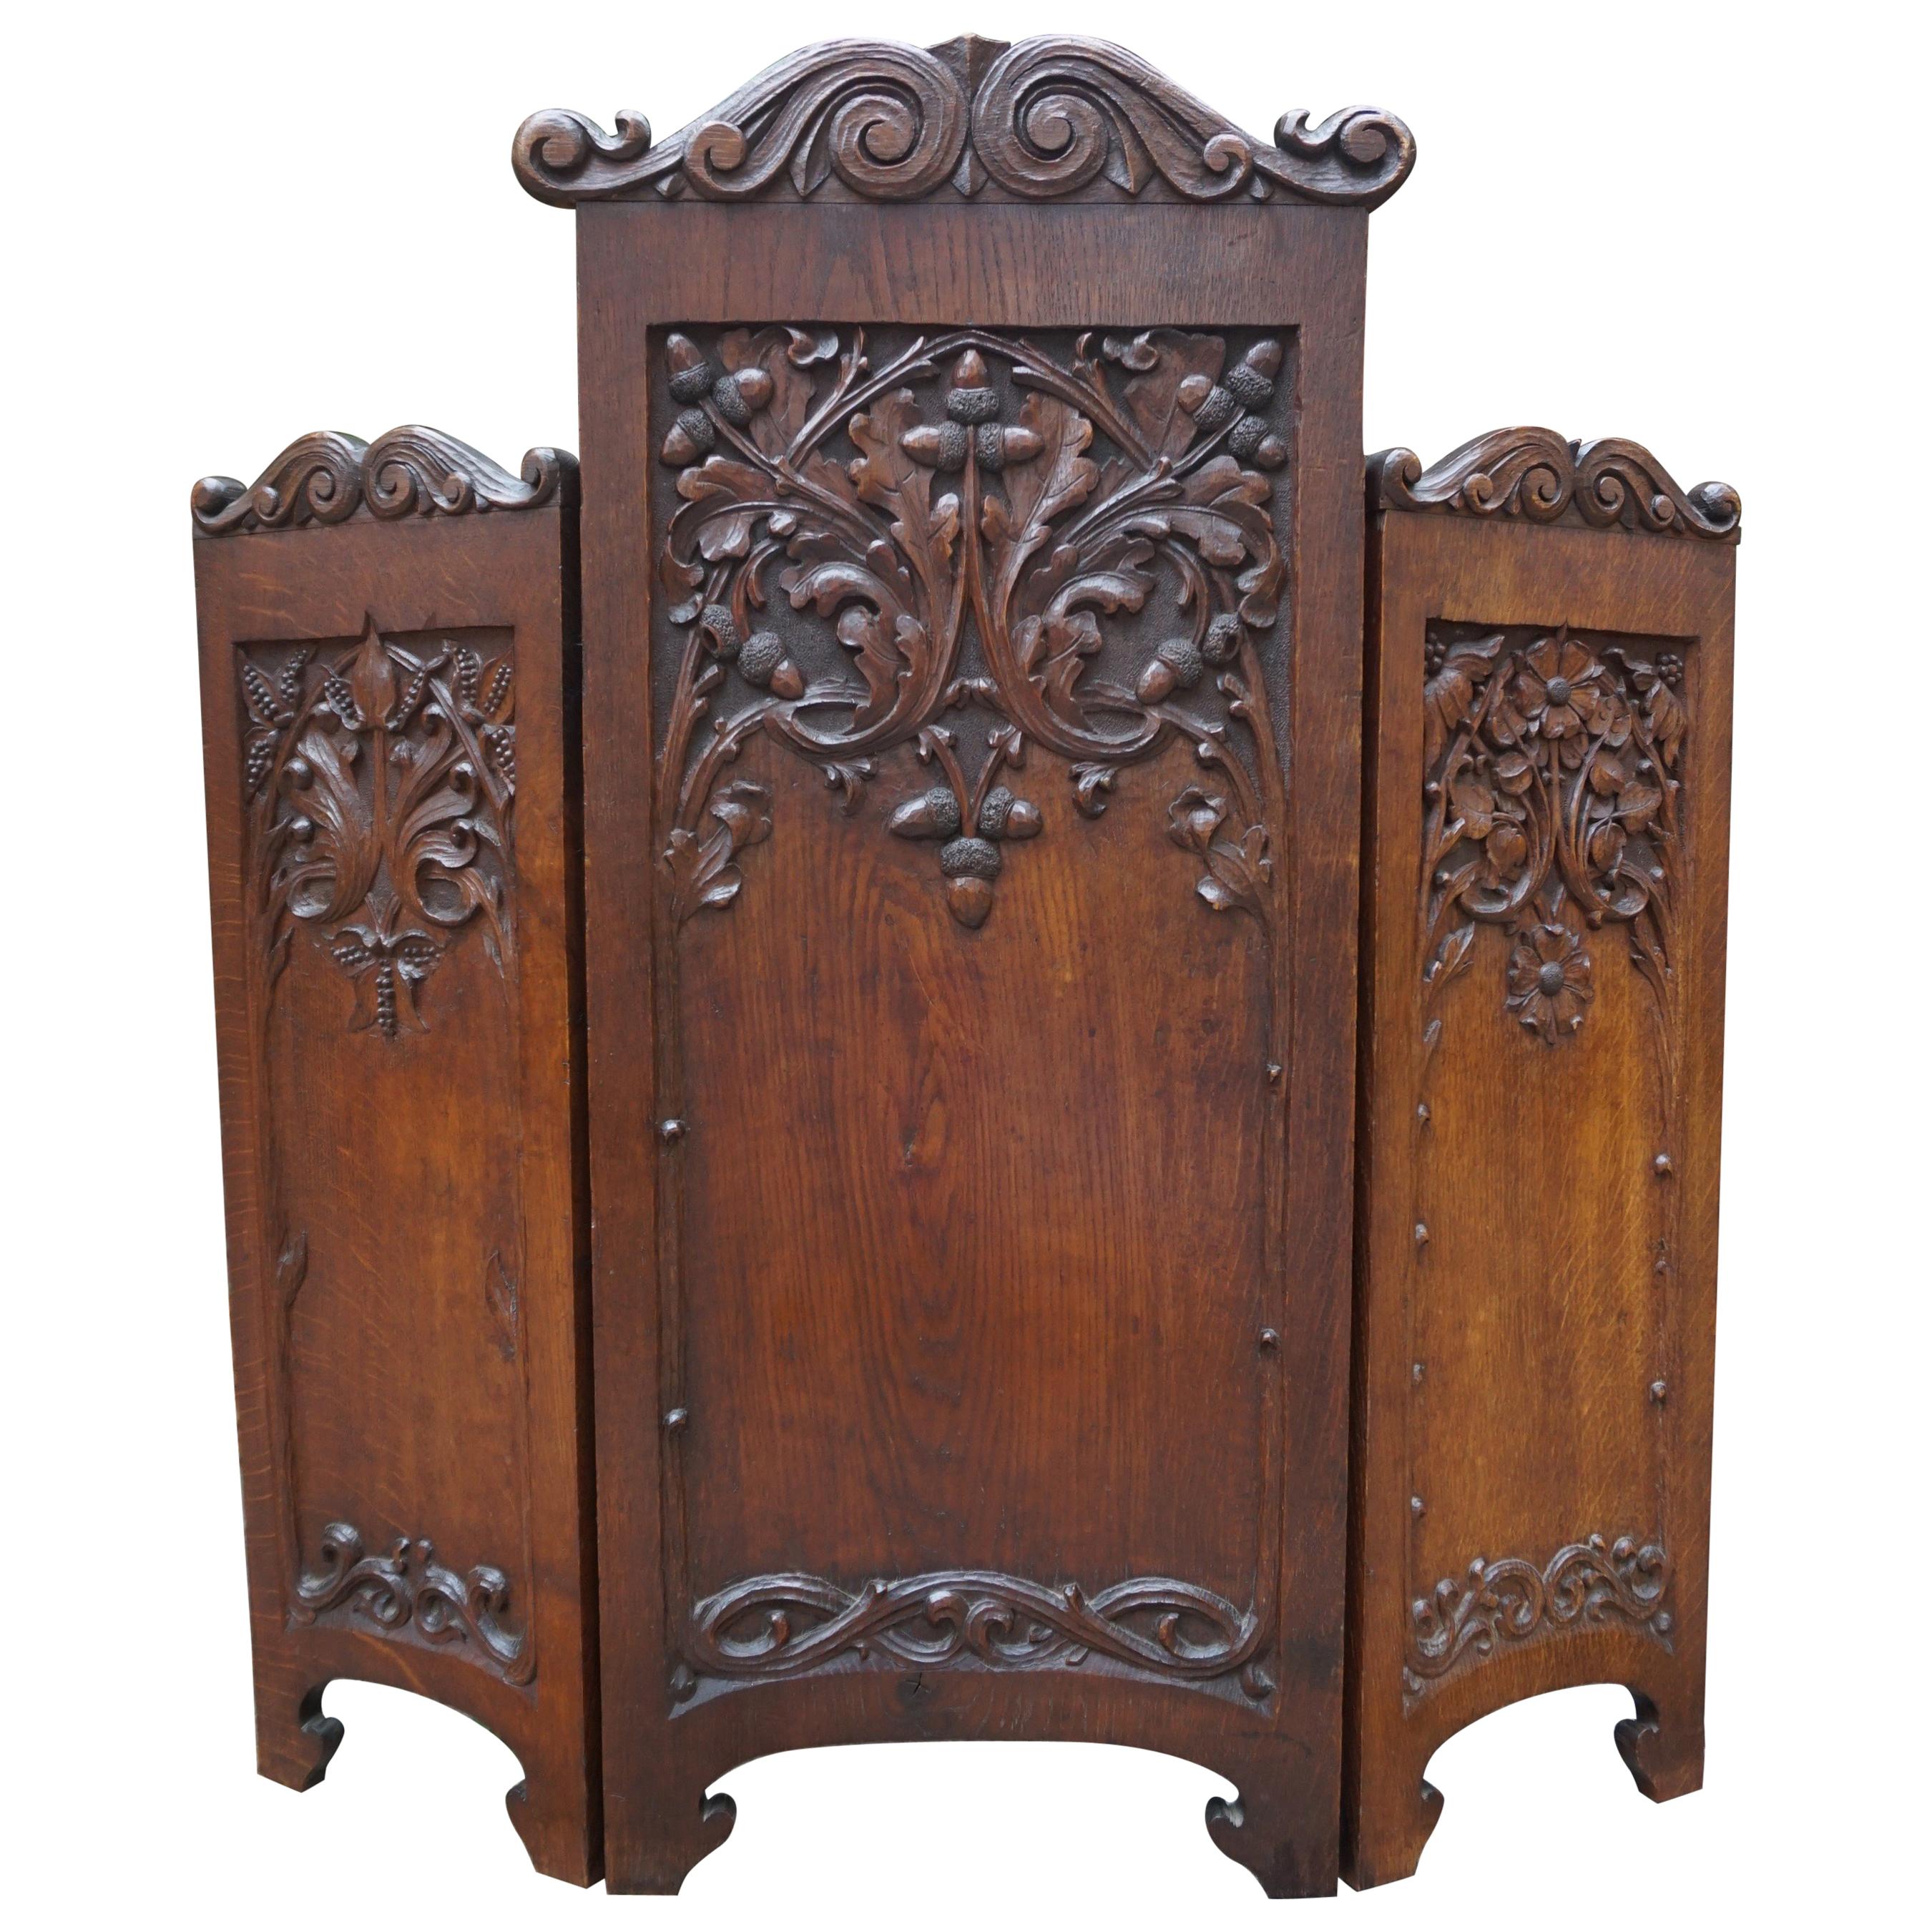 Superb Quality and Condition Hand-Carved Solid Oak Arts & Crafts Fire Screen